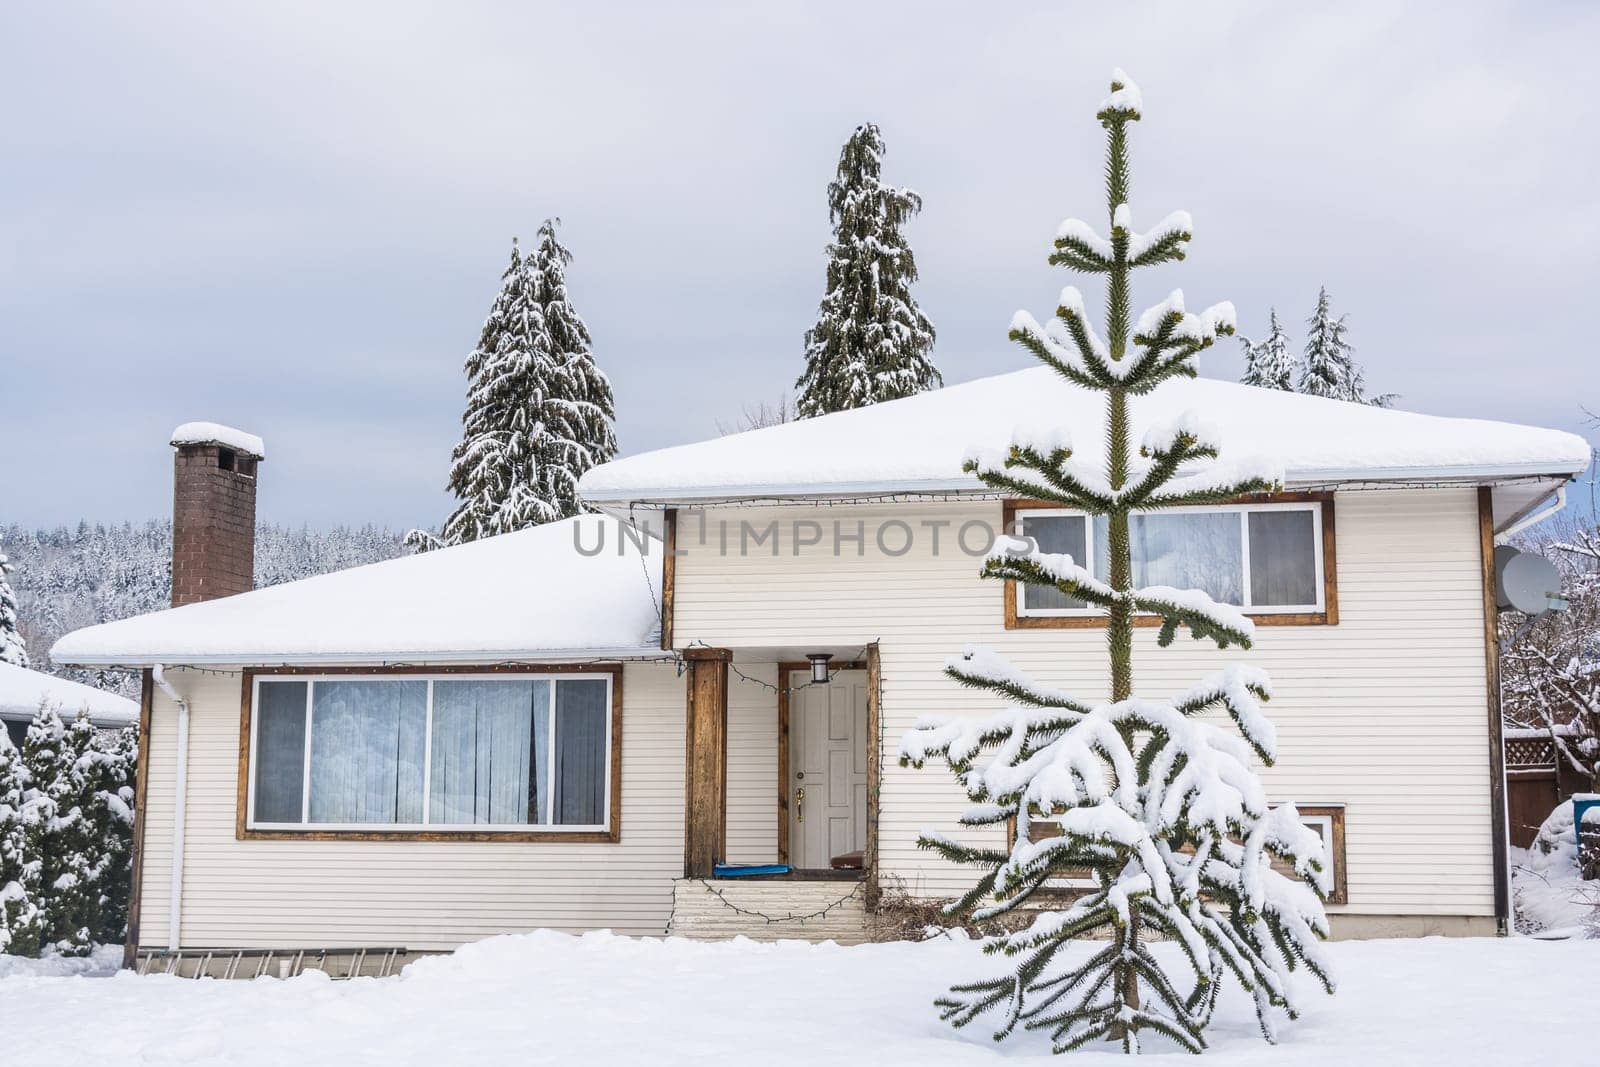 Family house with monkey tree on the front yard in snow on winter cloudy day by Imagenet